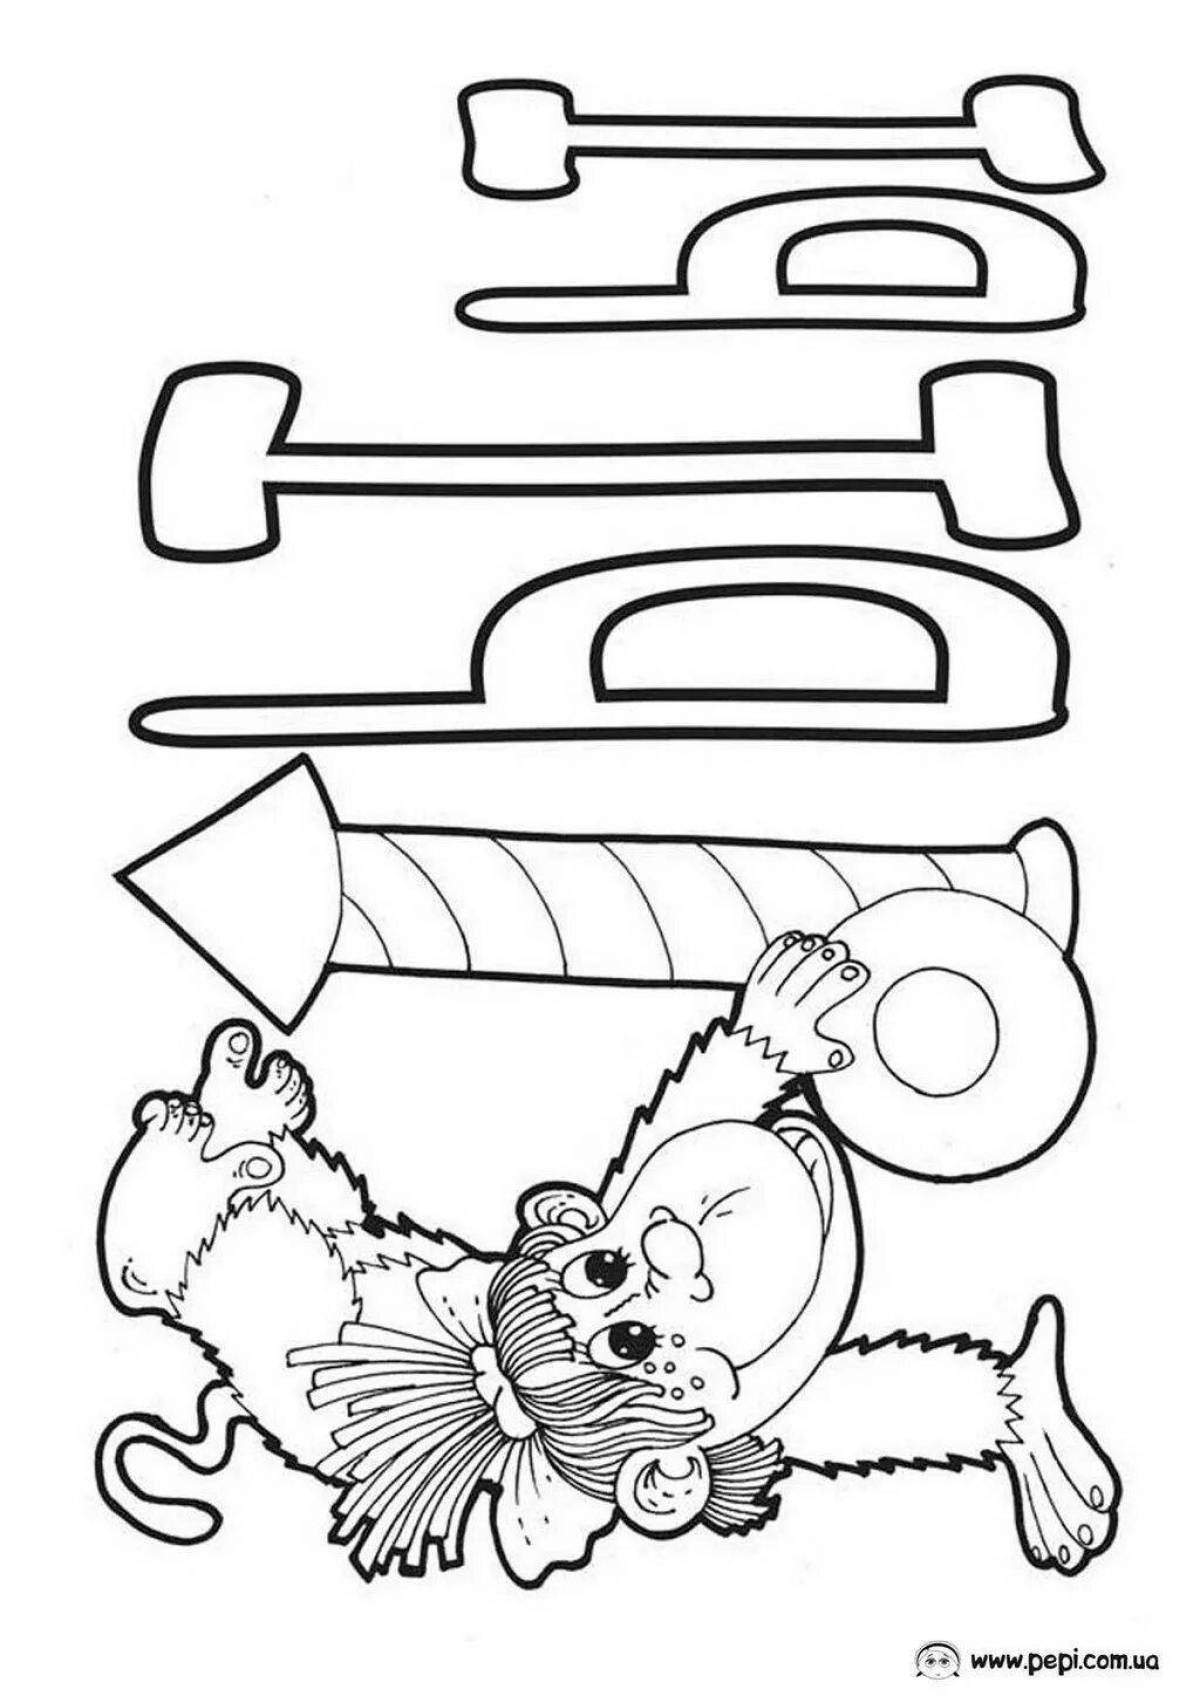 Playful coloring page with letter s for kids